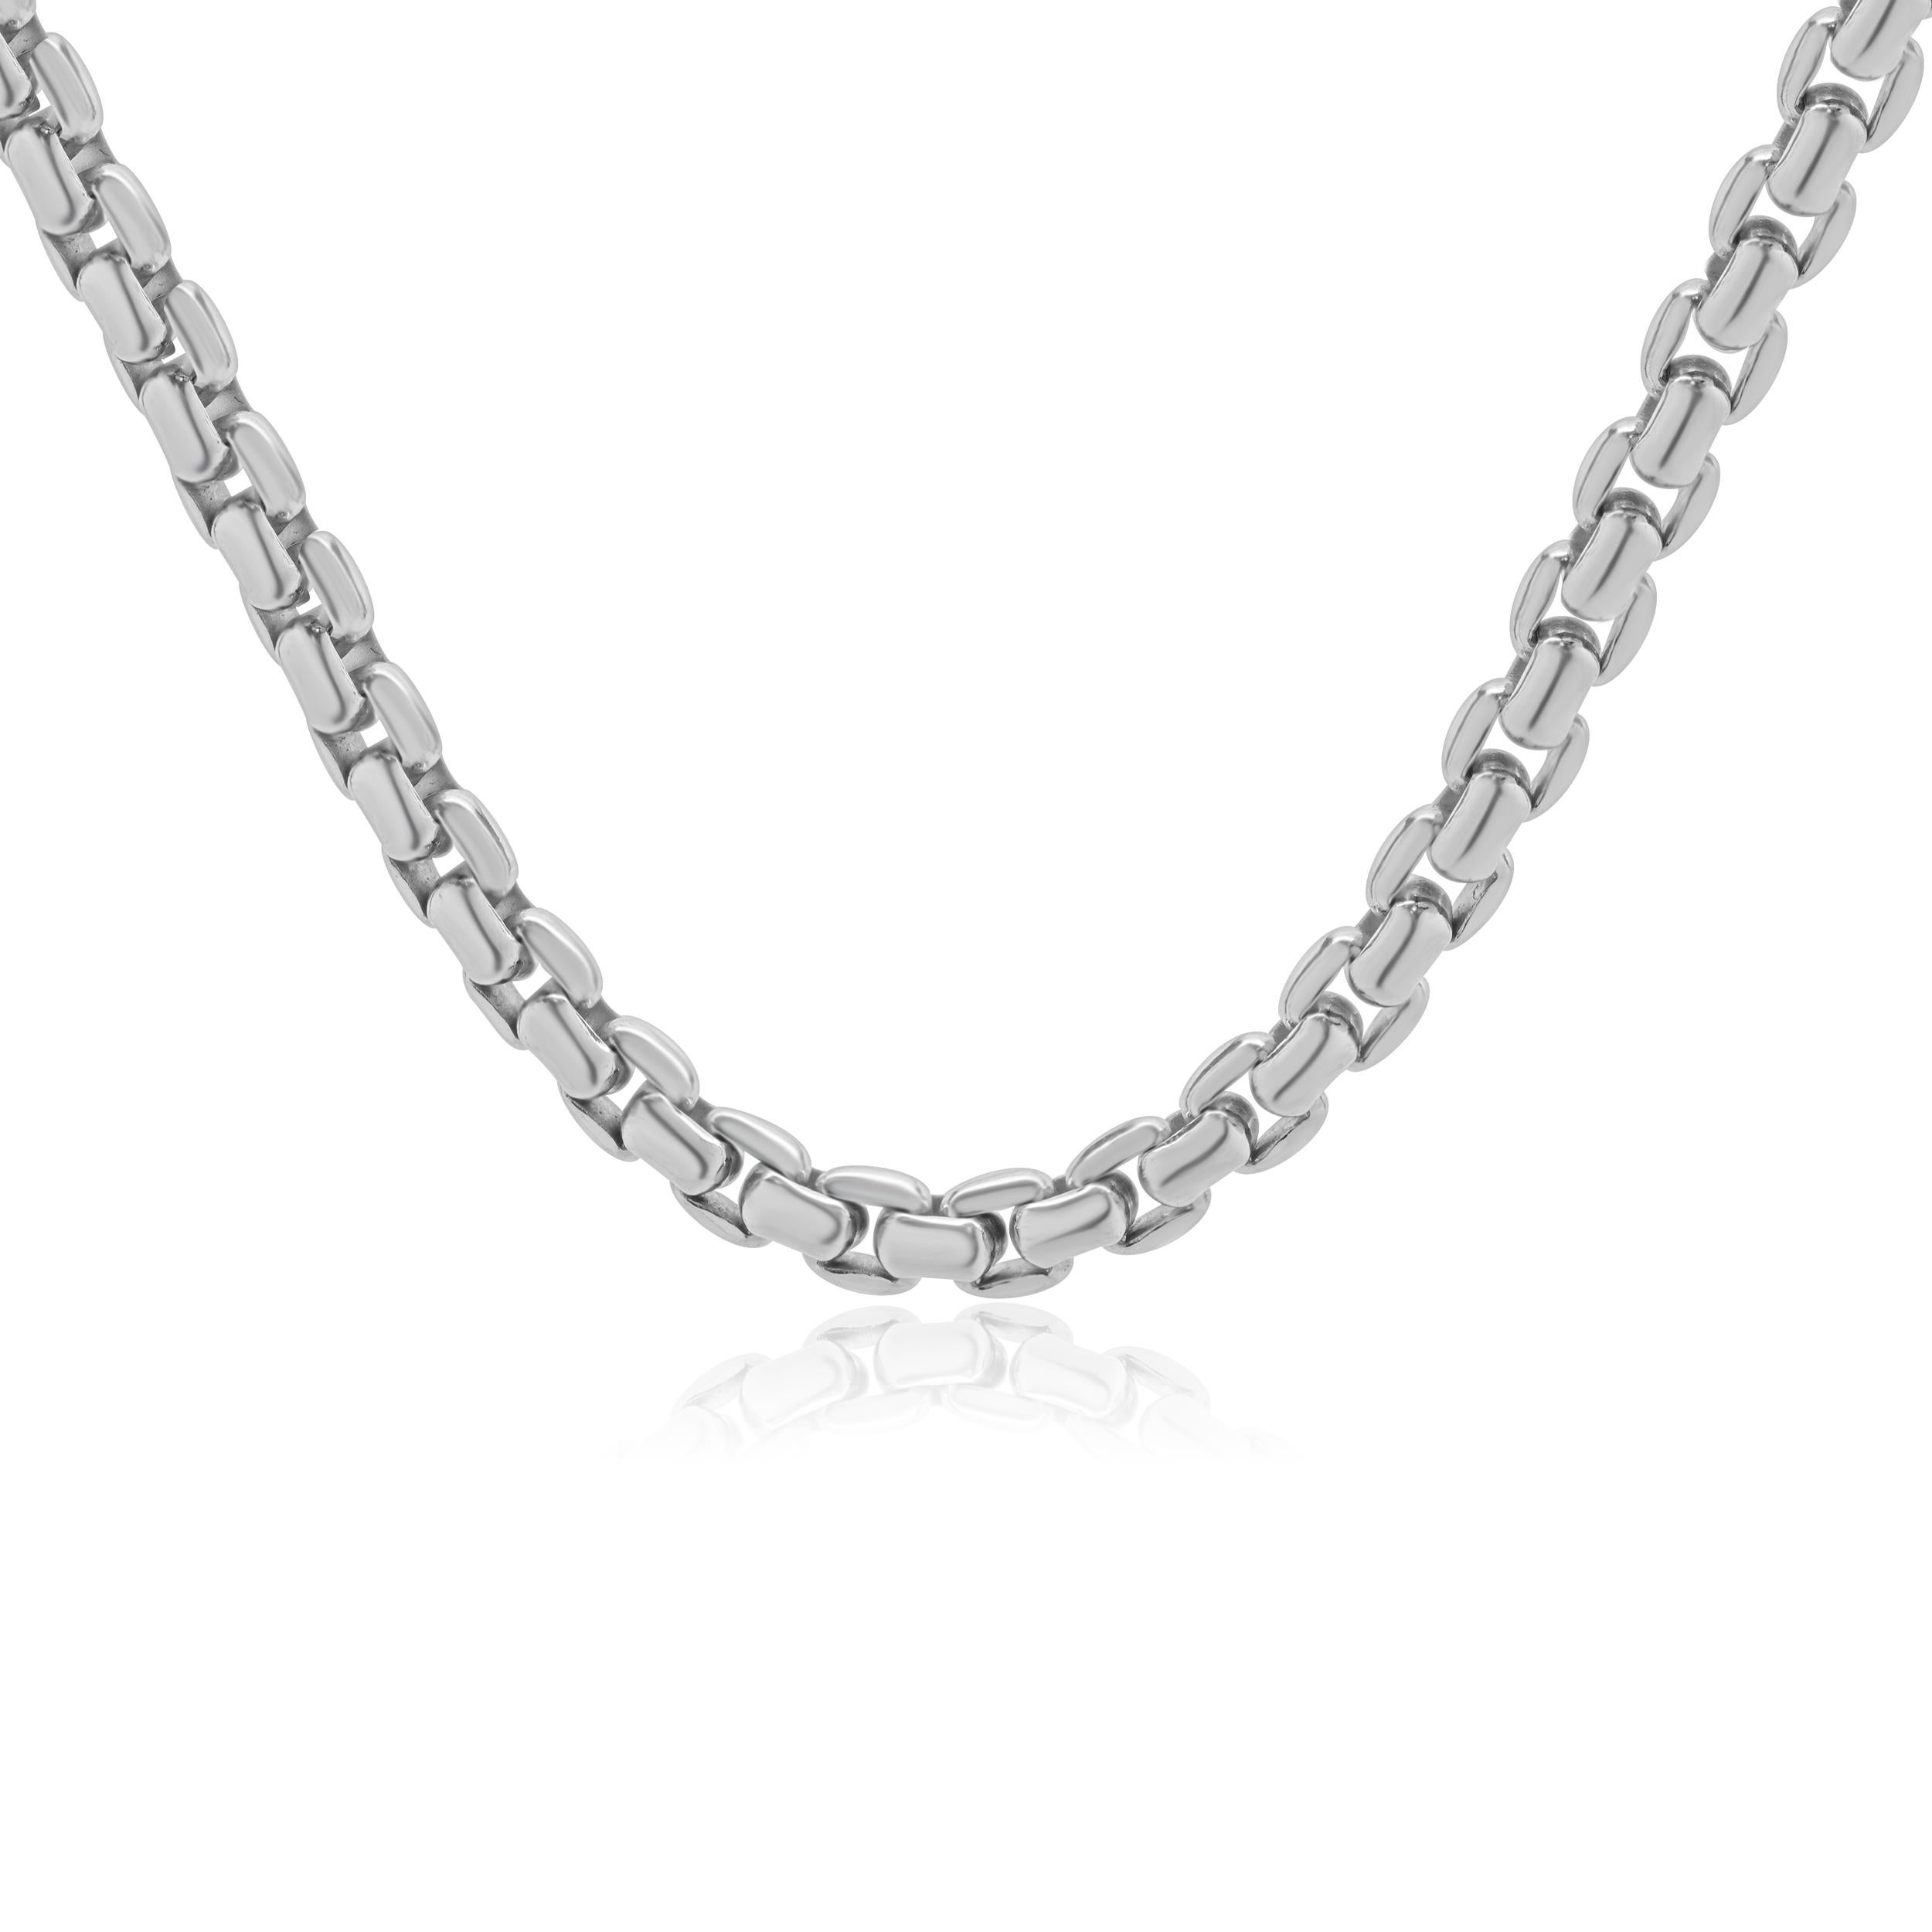 Designer: Tiffany & Co. 
Material: 18K white gold
Dimensions: chain measures 20-inches 
Weight: 76.76 grams